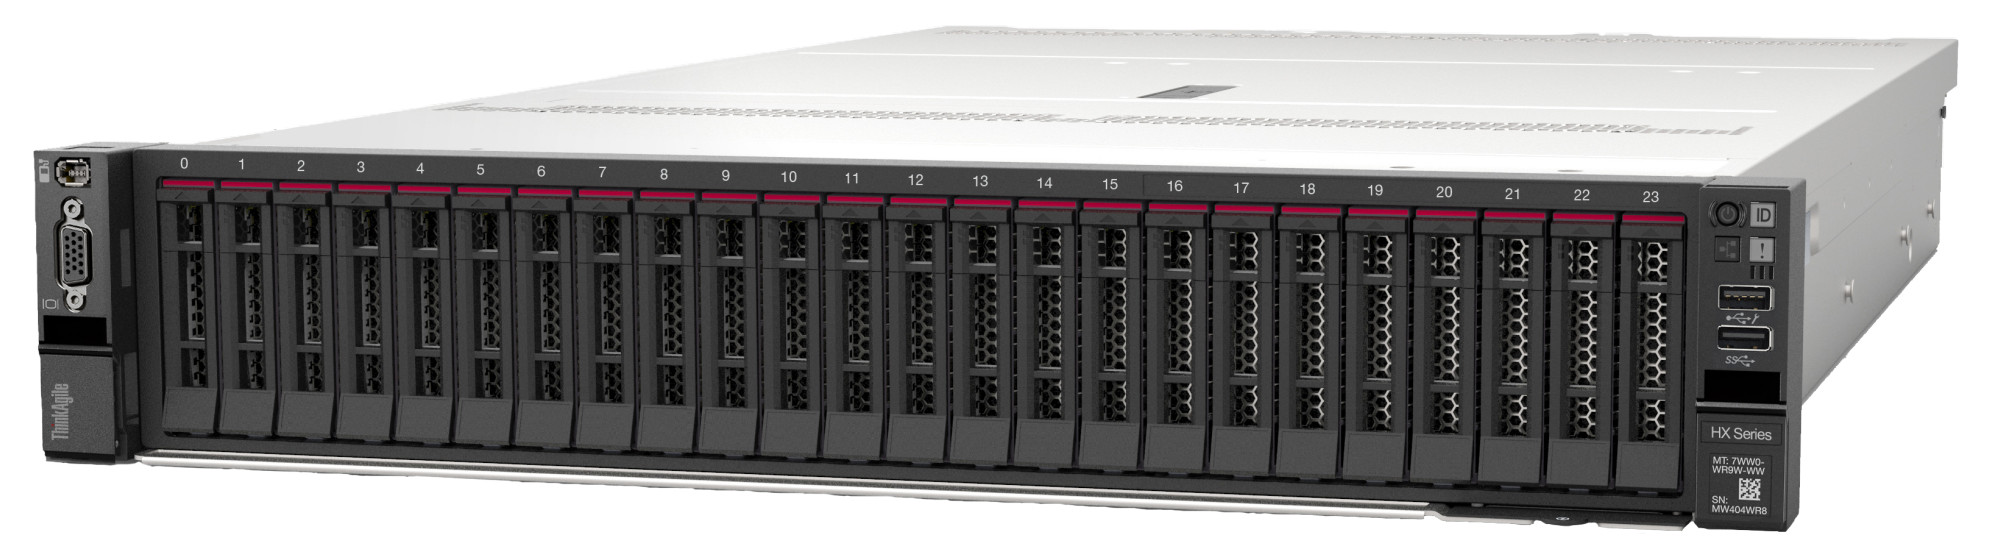 Lenovo ThinkAgile HX665 V3 Integrated Systems and Certified Nodes with 2.5-inch drive bays